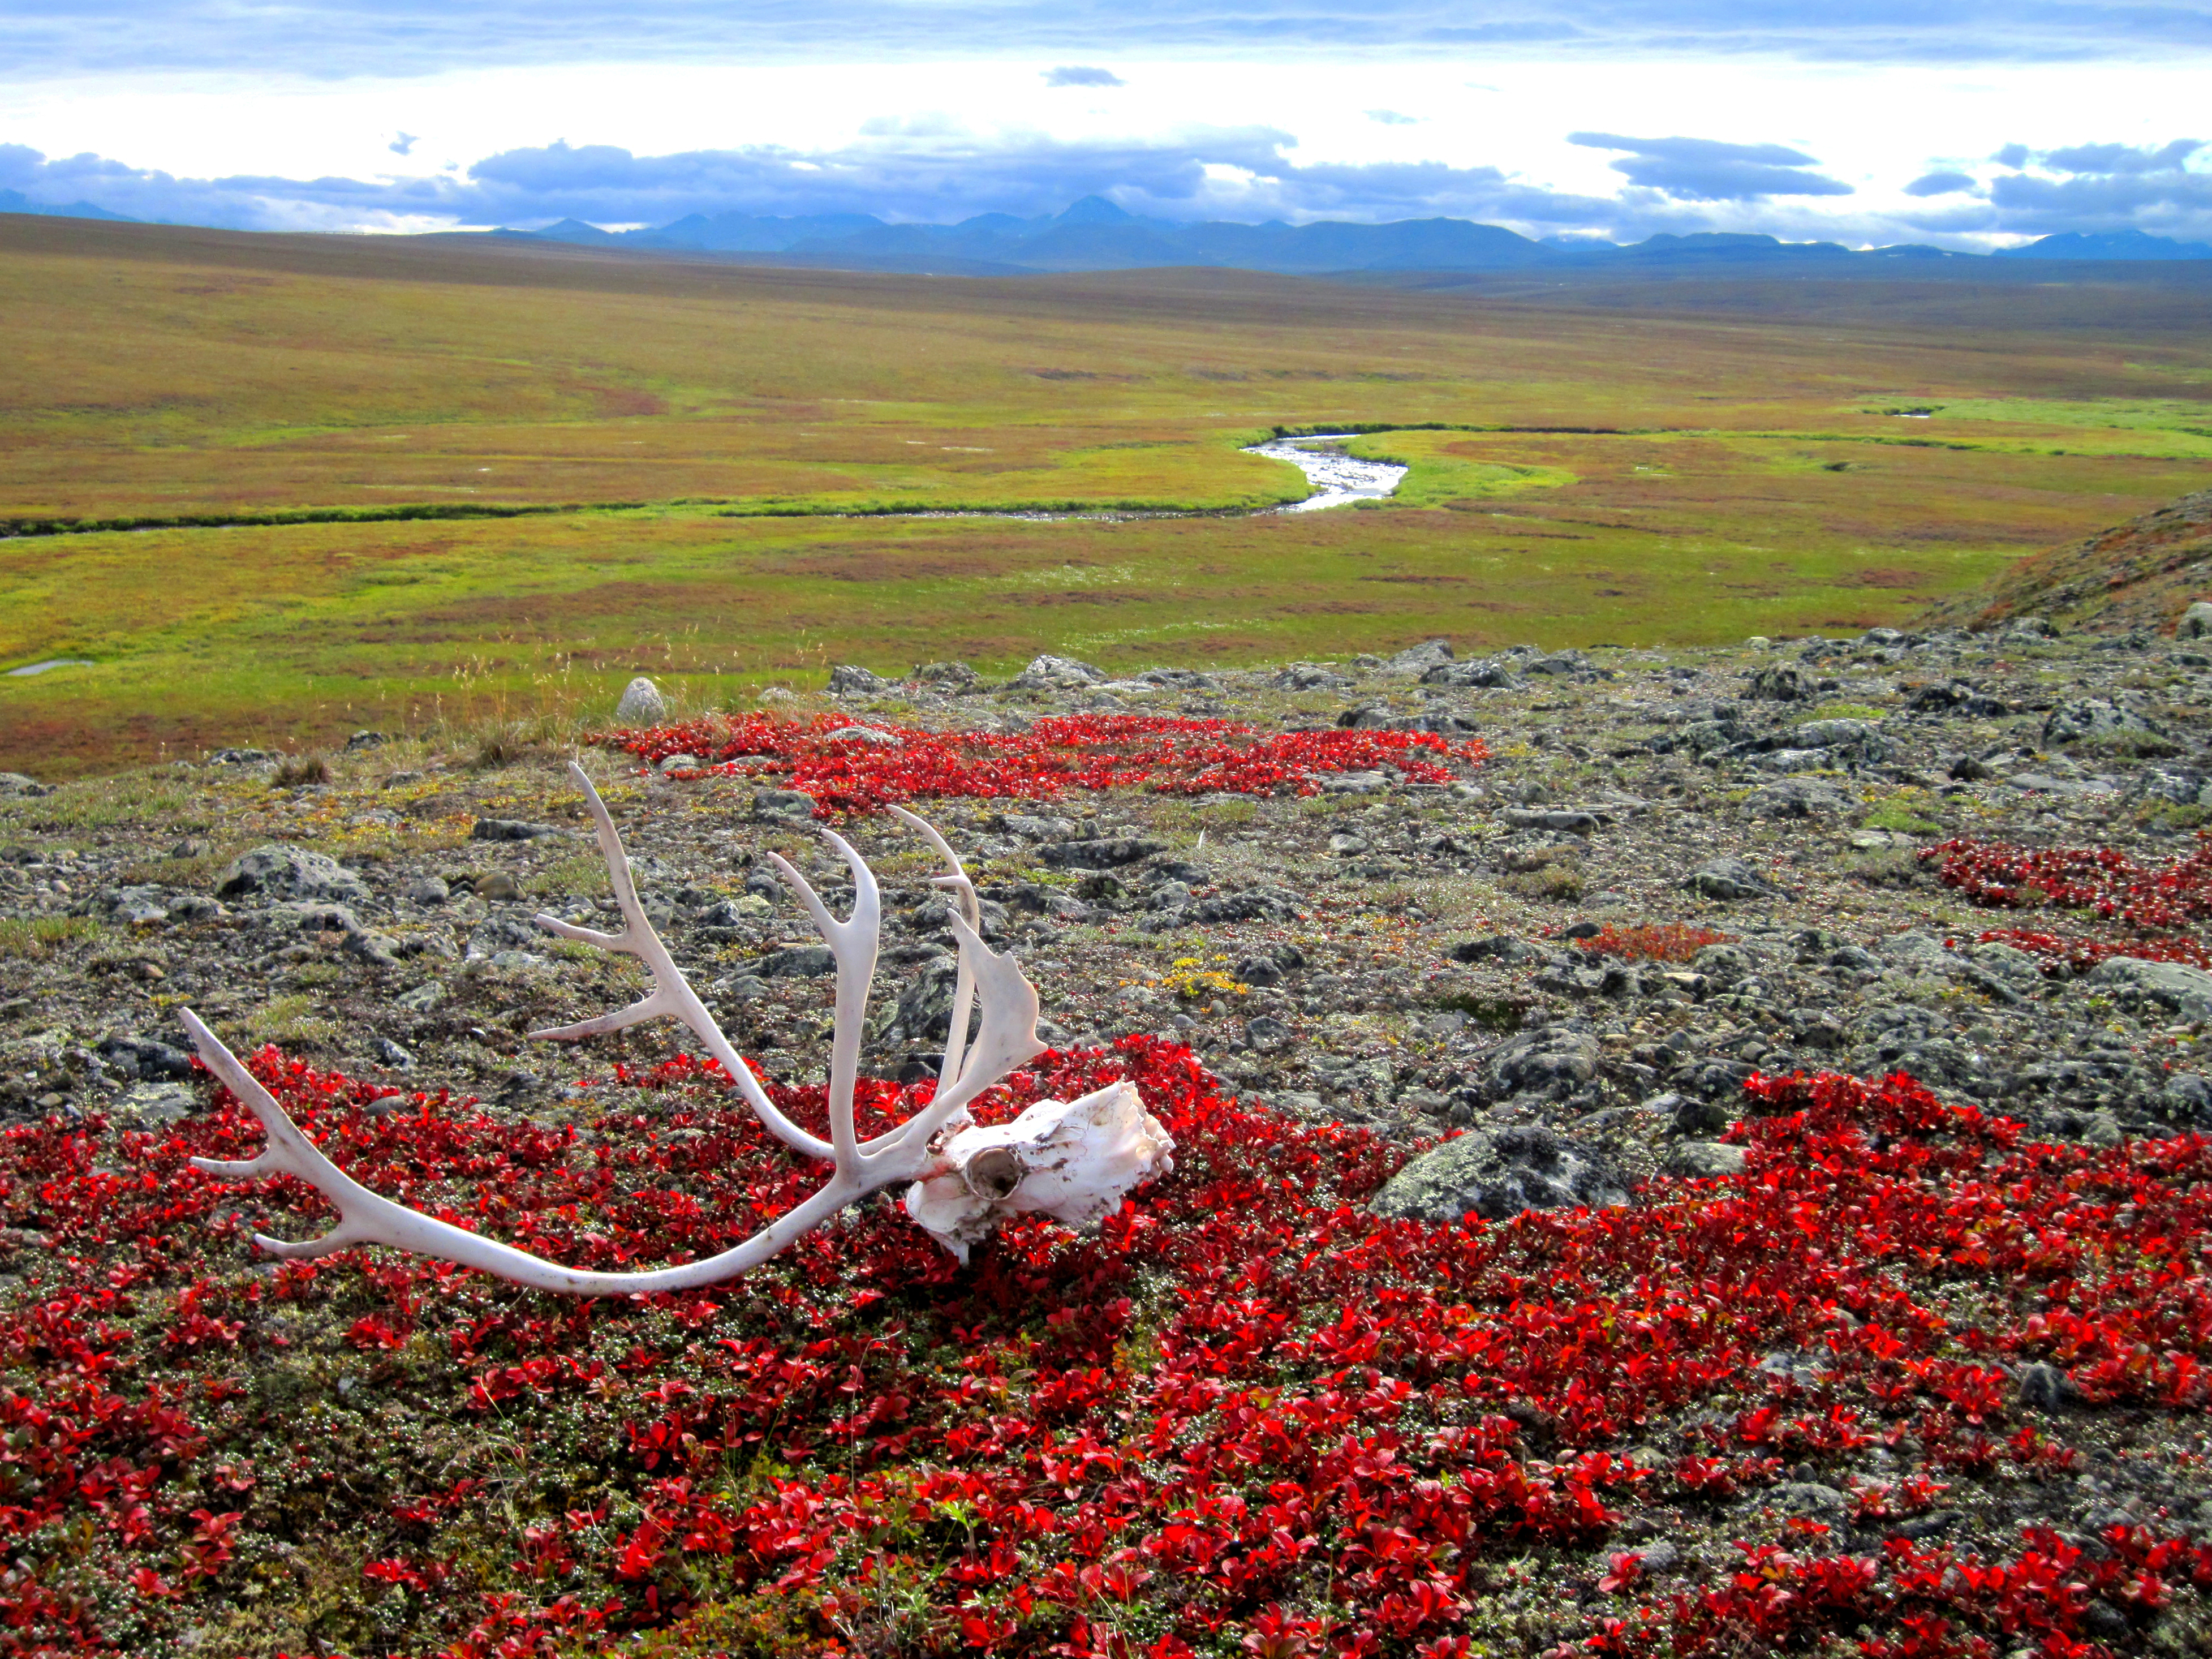 Multimedia Gallery - Shifting tundra vegetation means change for arctic  animals (Image 5) | NSF - National Science Foundation